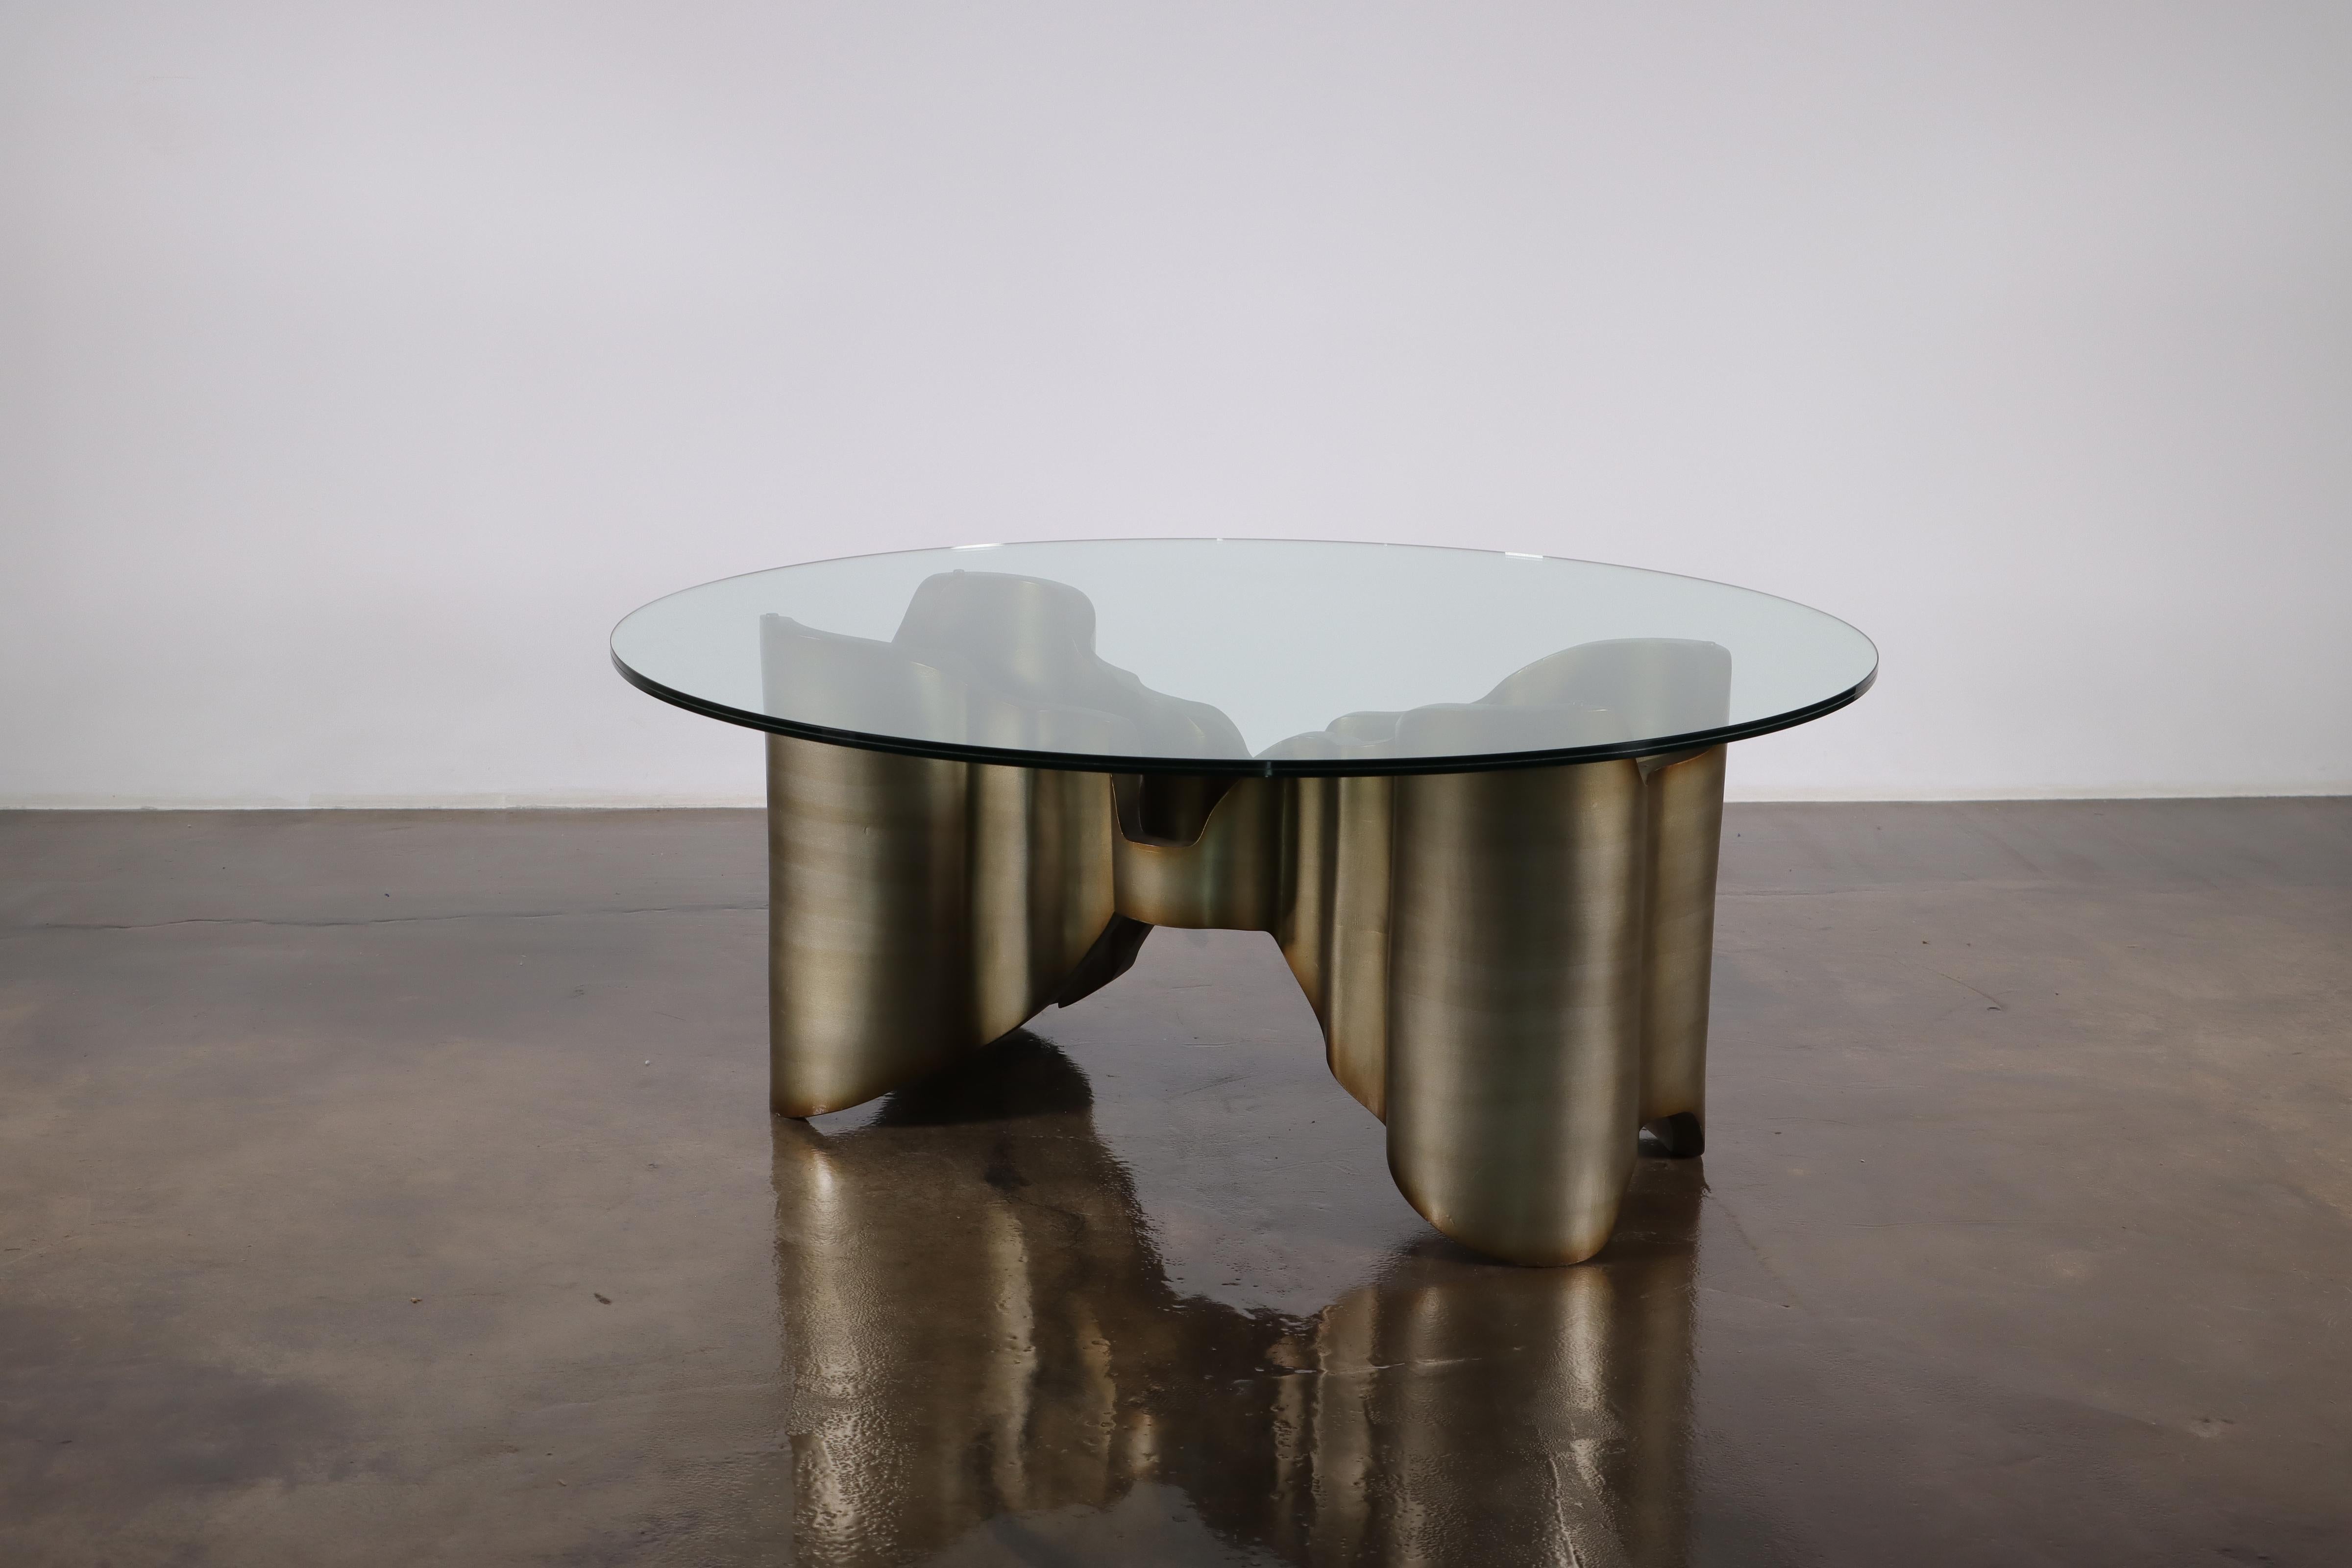 Sculptural Lacquered wood & glass coffee table by Costantini, Mariposa -In Stock

Measurements are 42